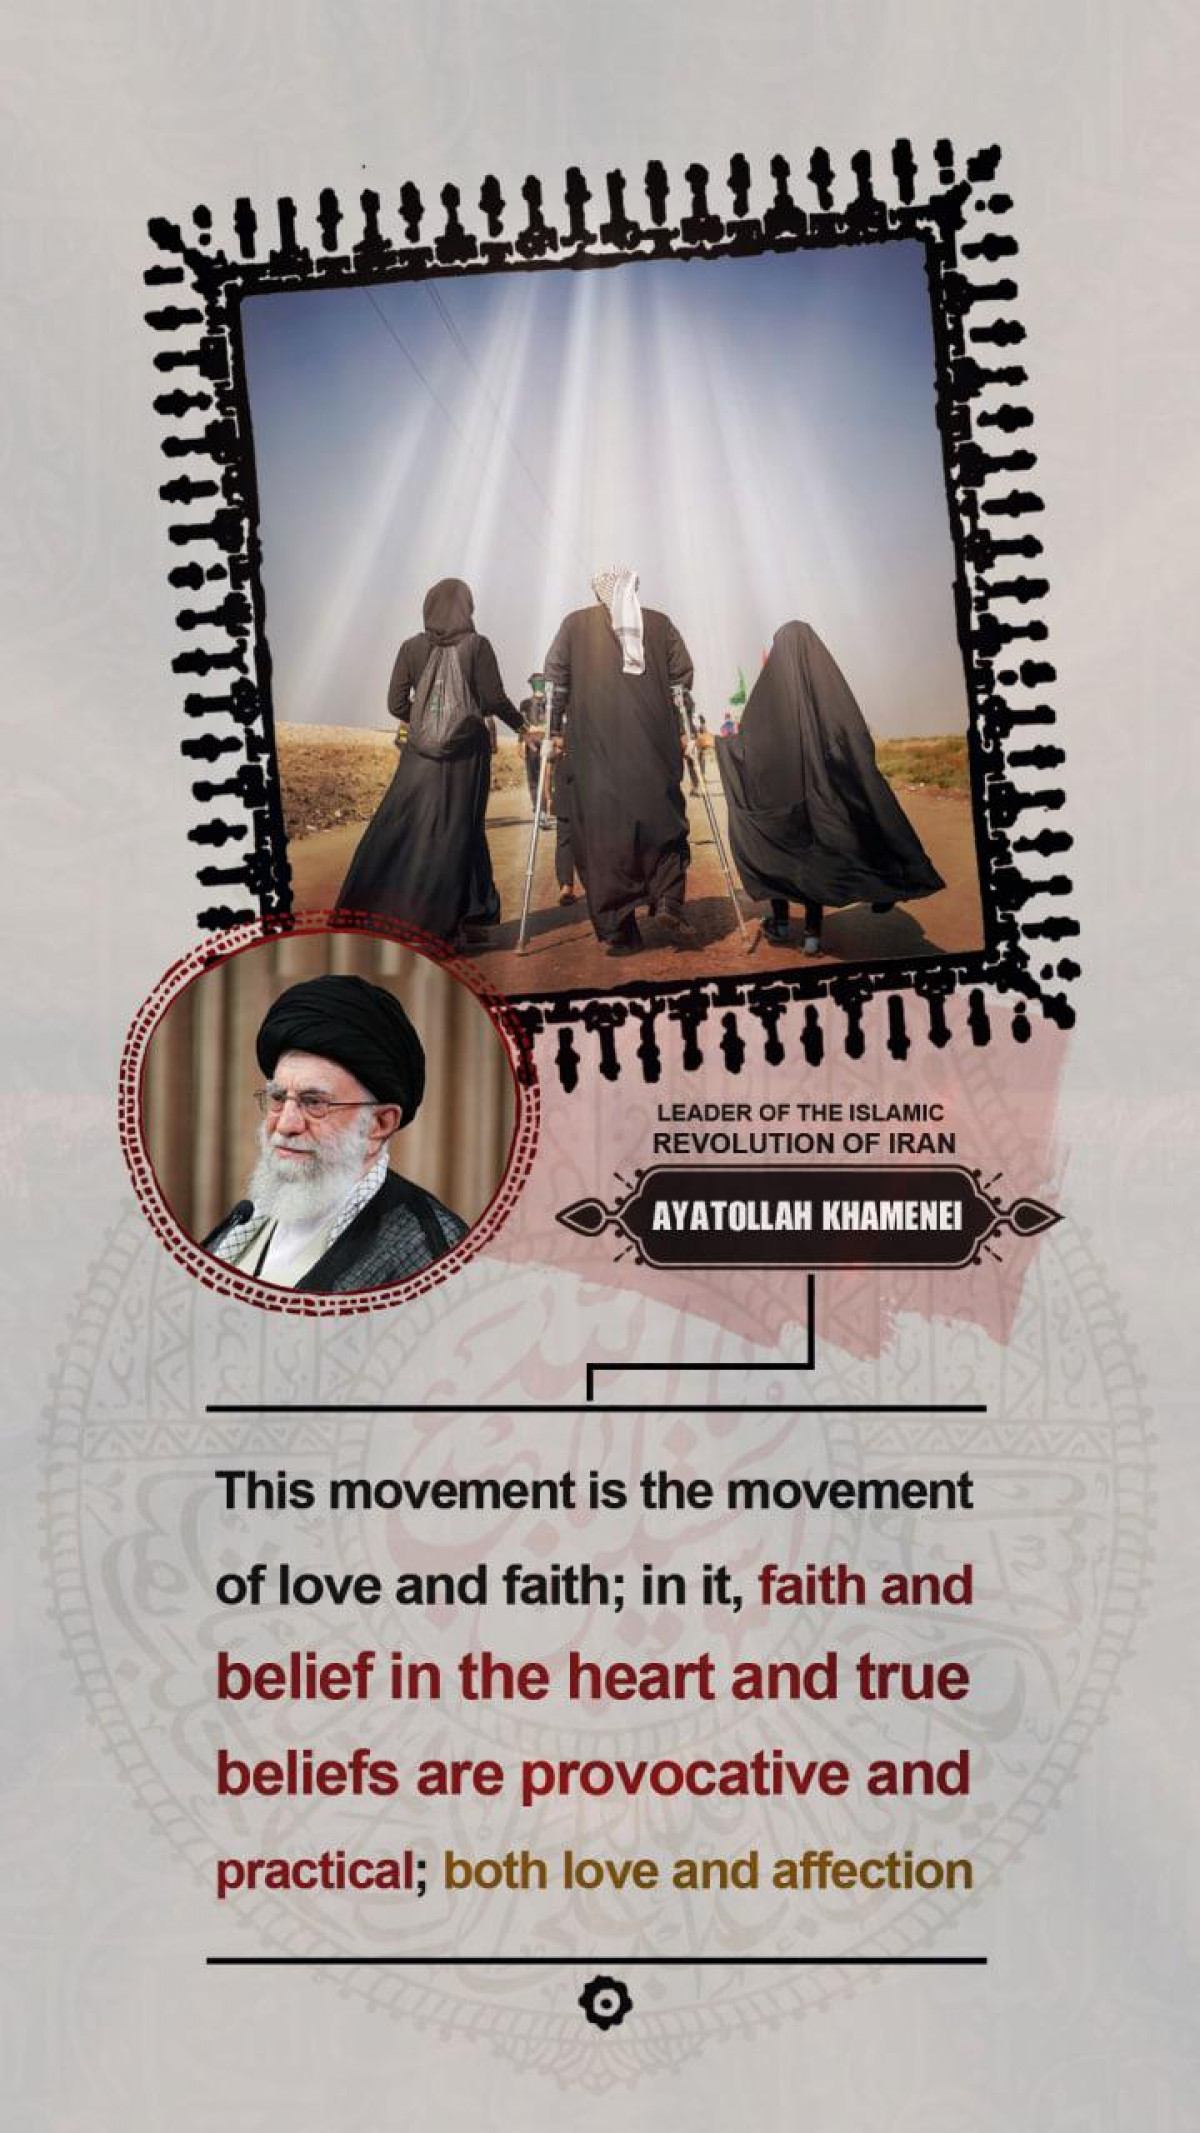 This movement is the movement of love and faith